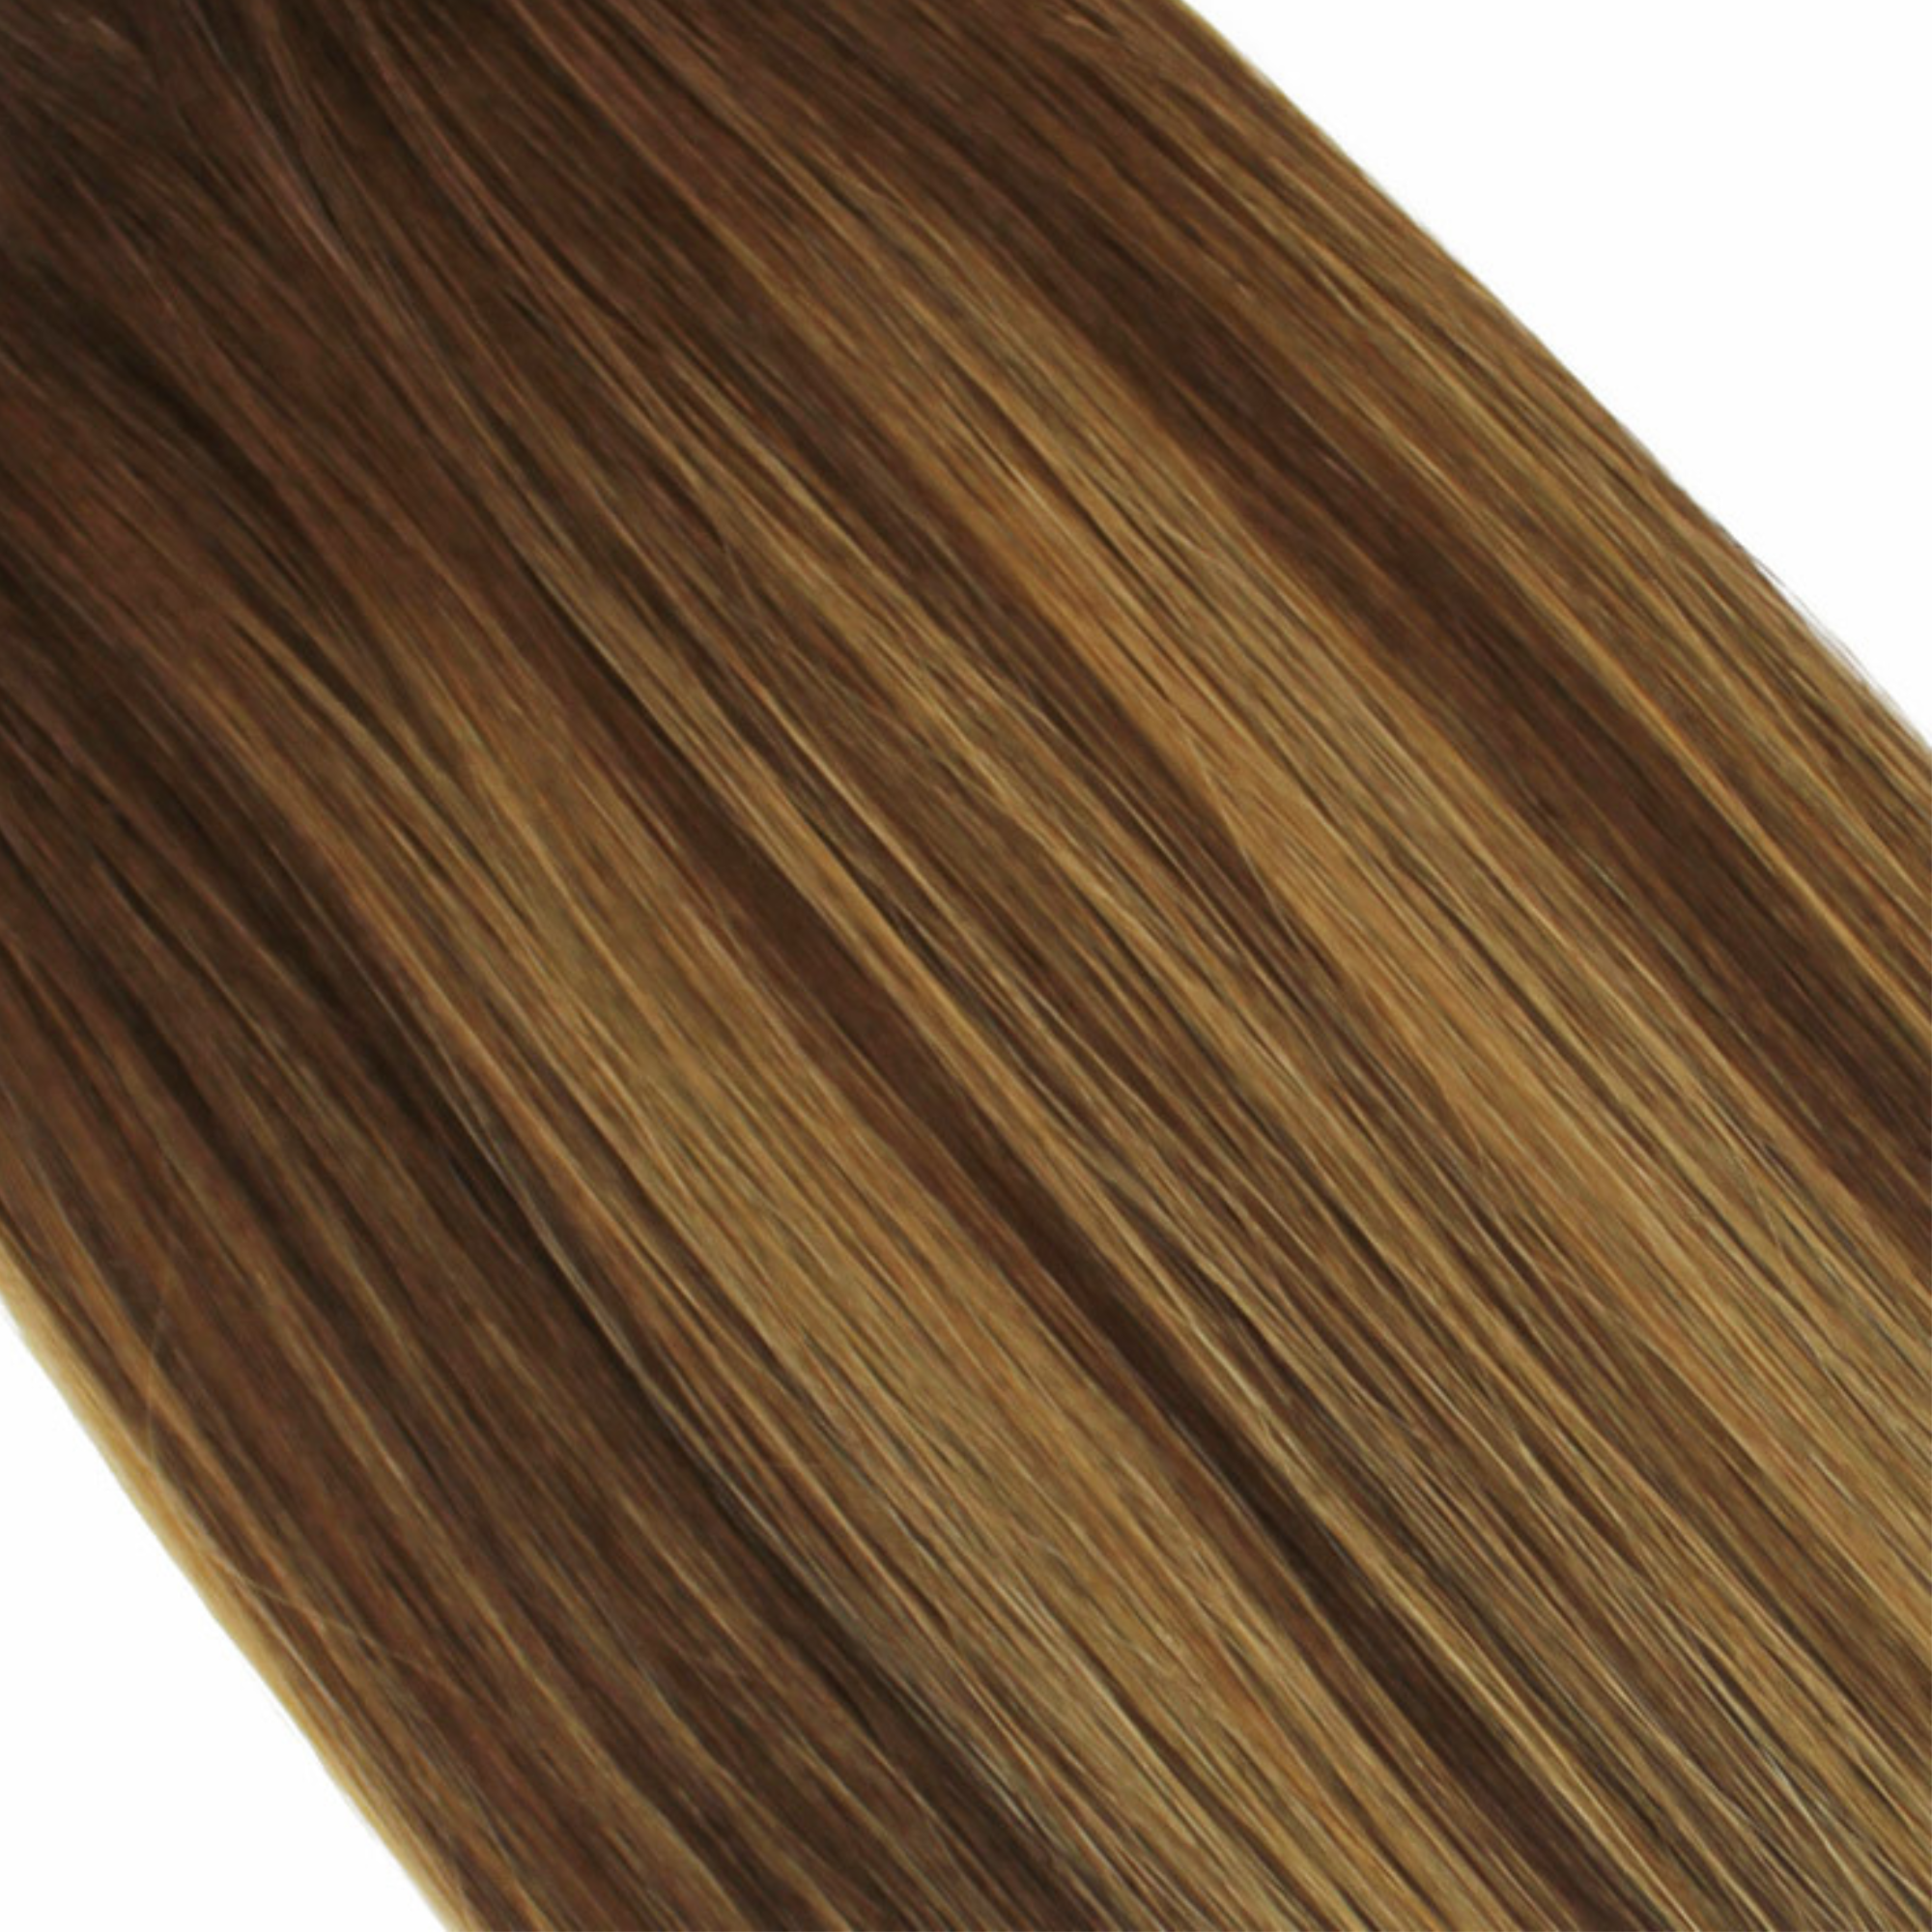 "hair rehab london 18" length 120 grams weight original clip-in hair extensions shade titled rooted bronze